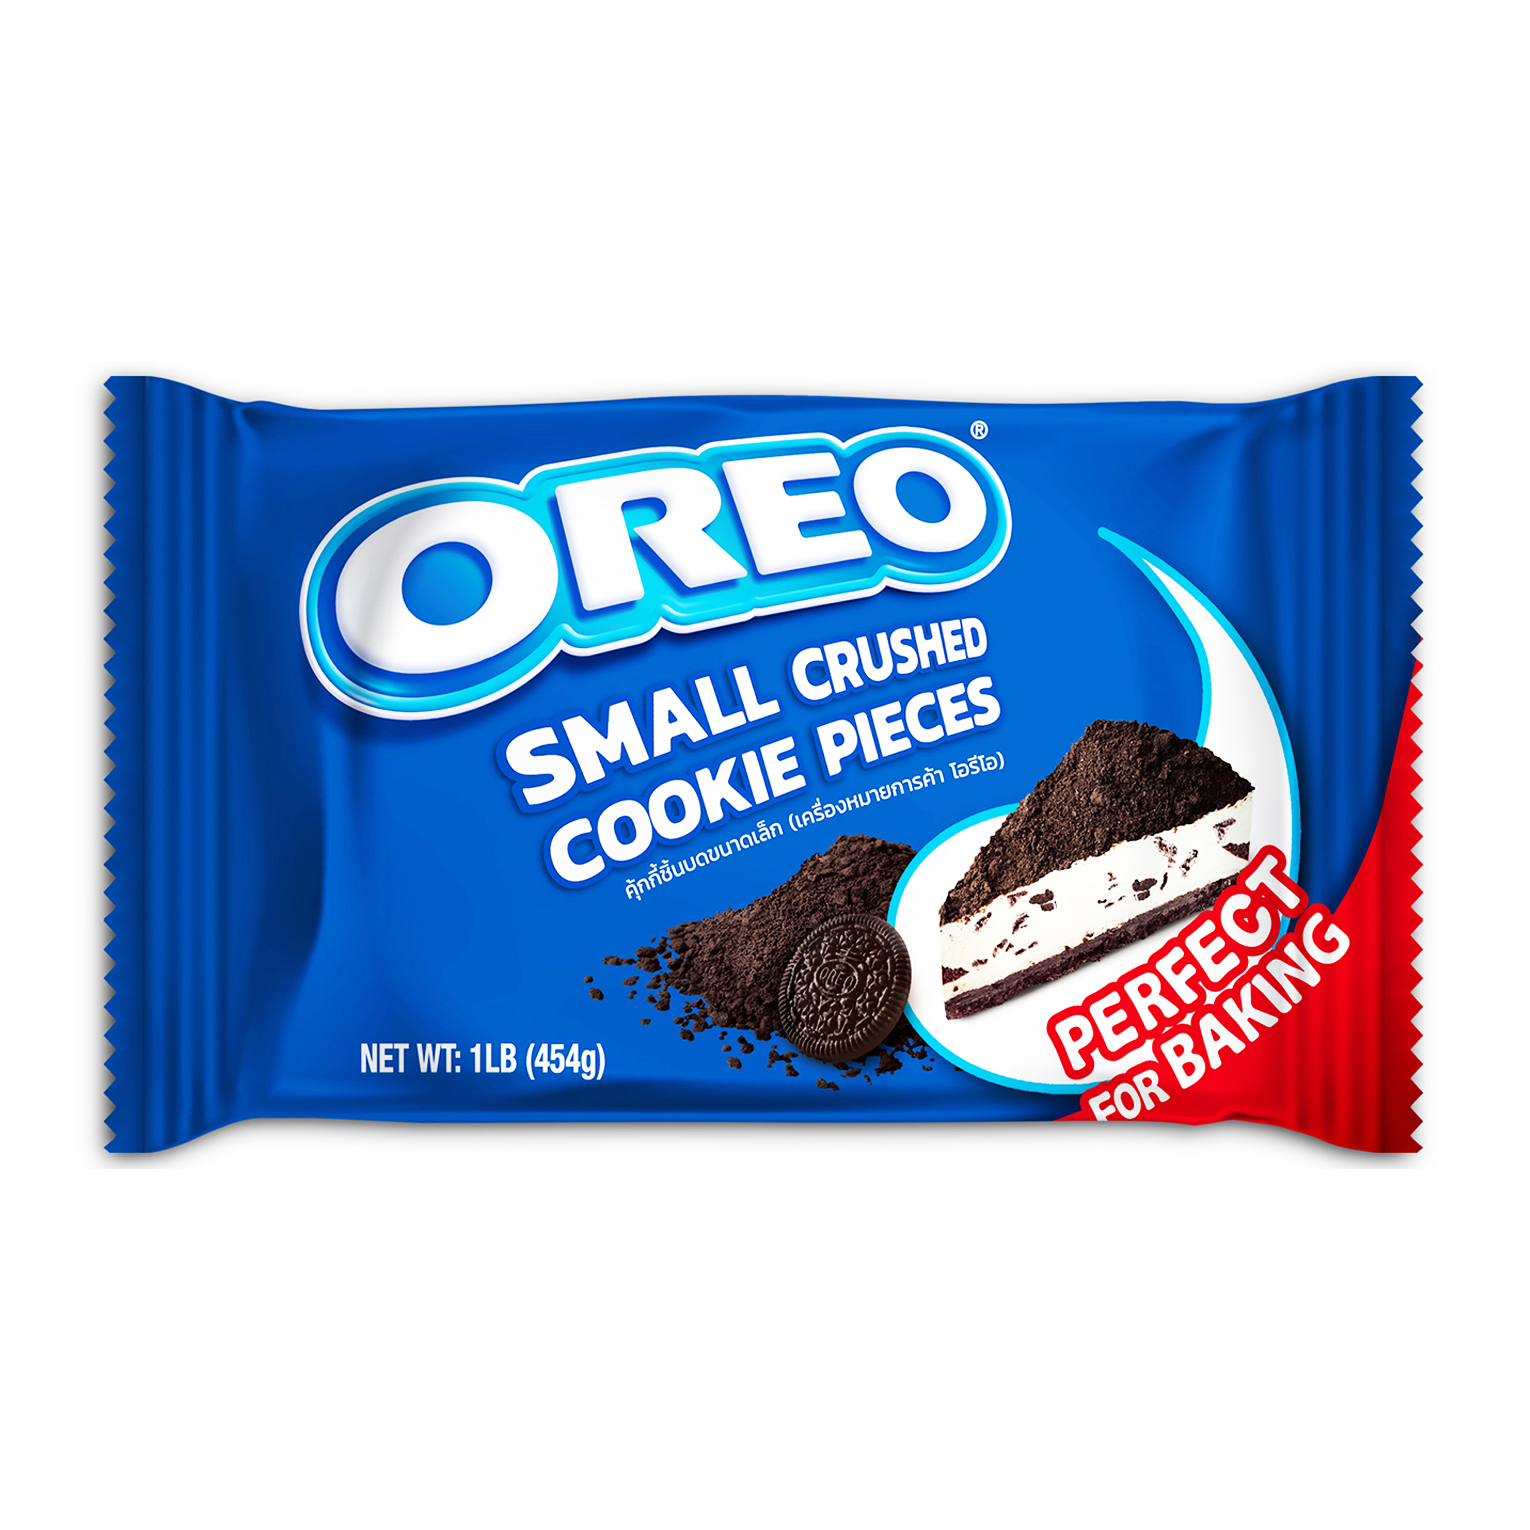 Oreo Small Crushed Cookie Pieces 454g